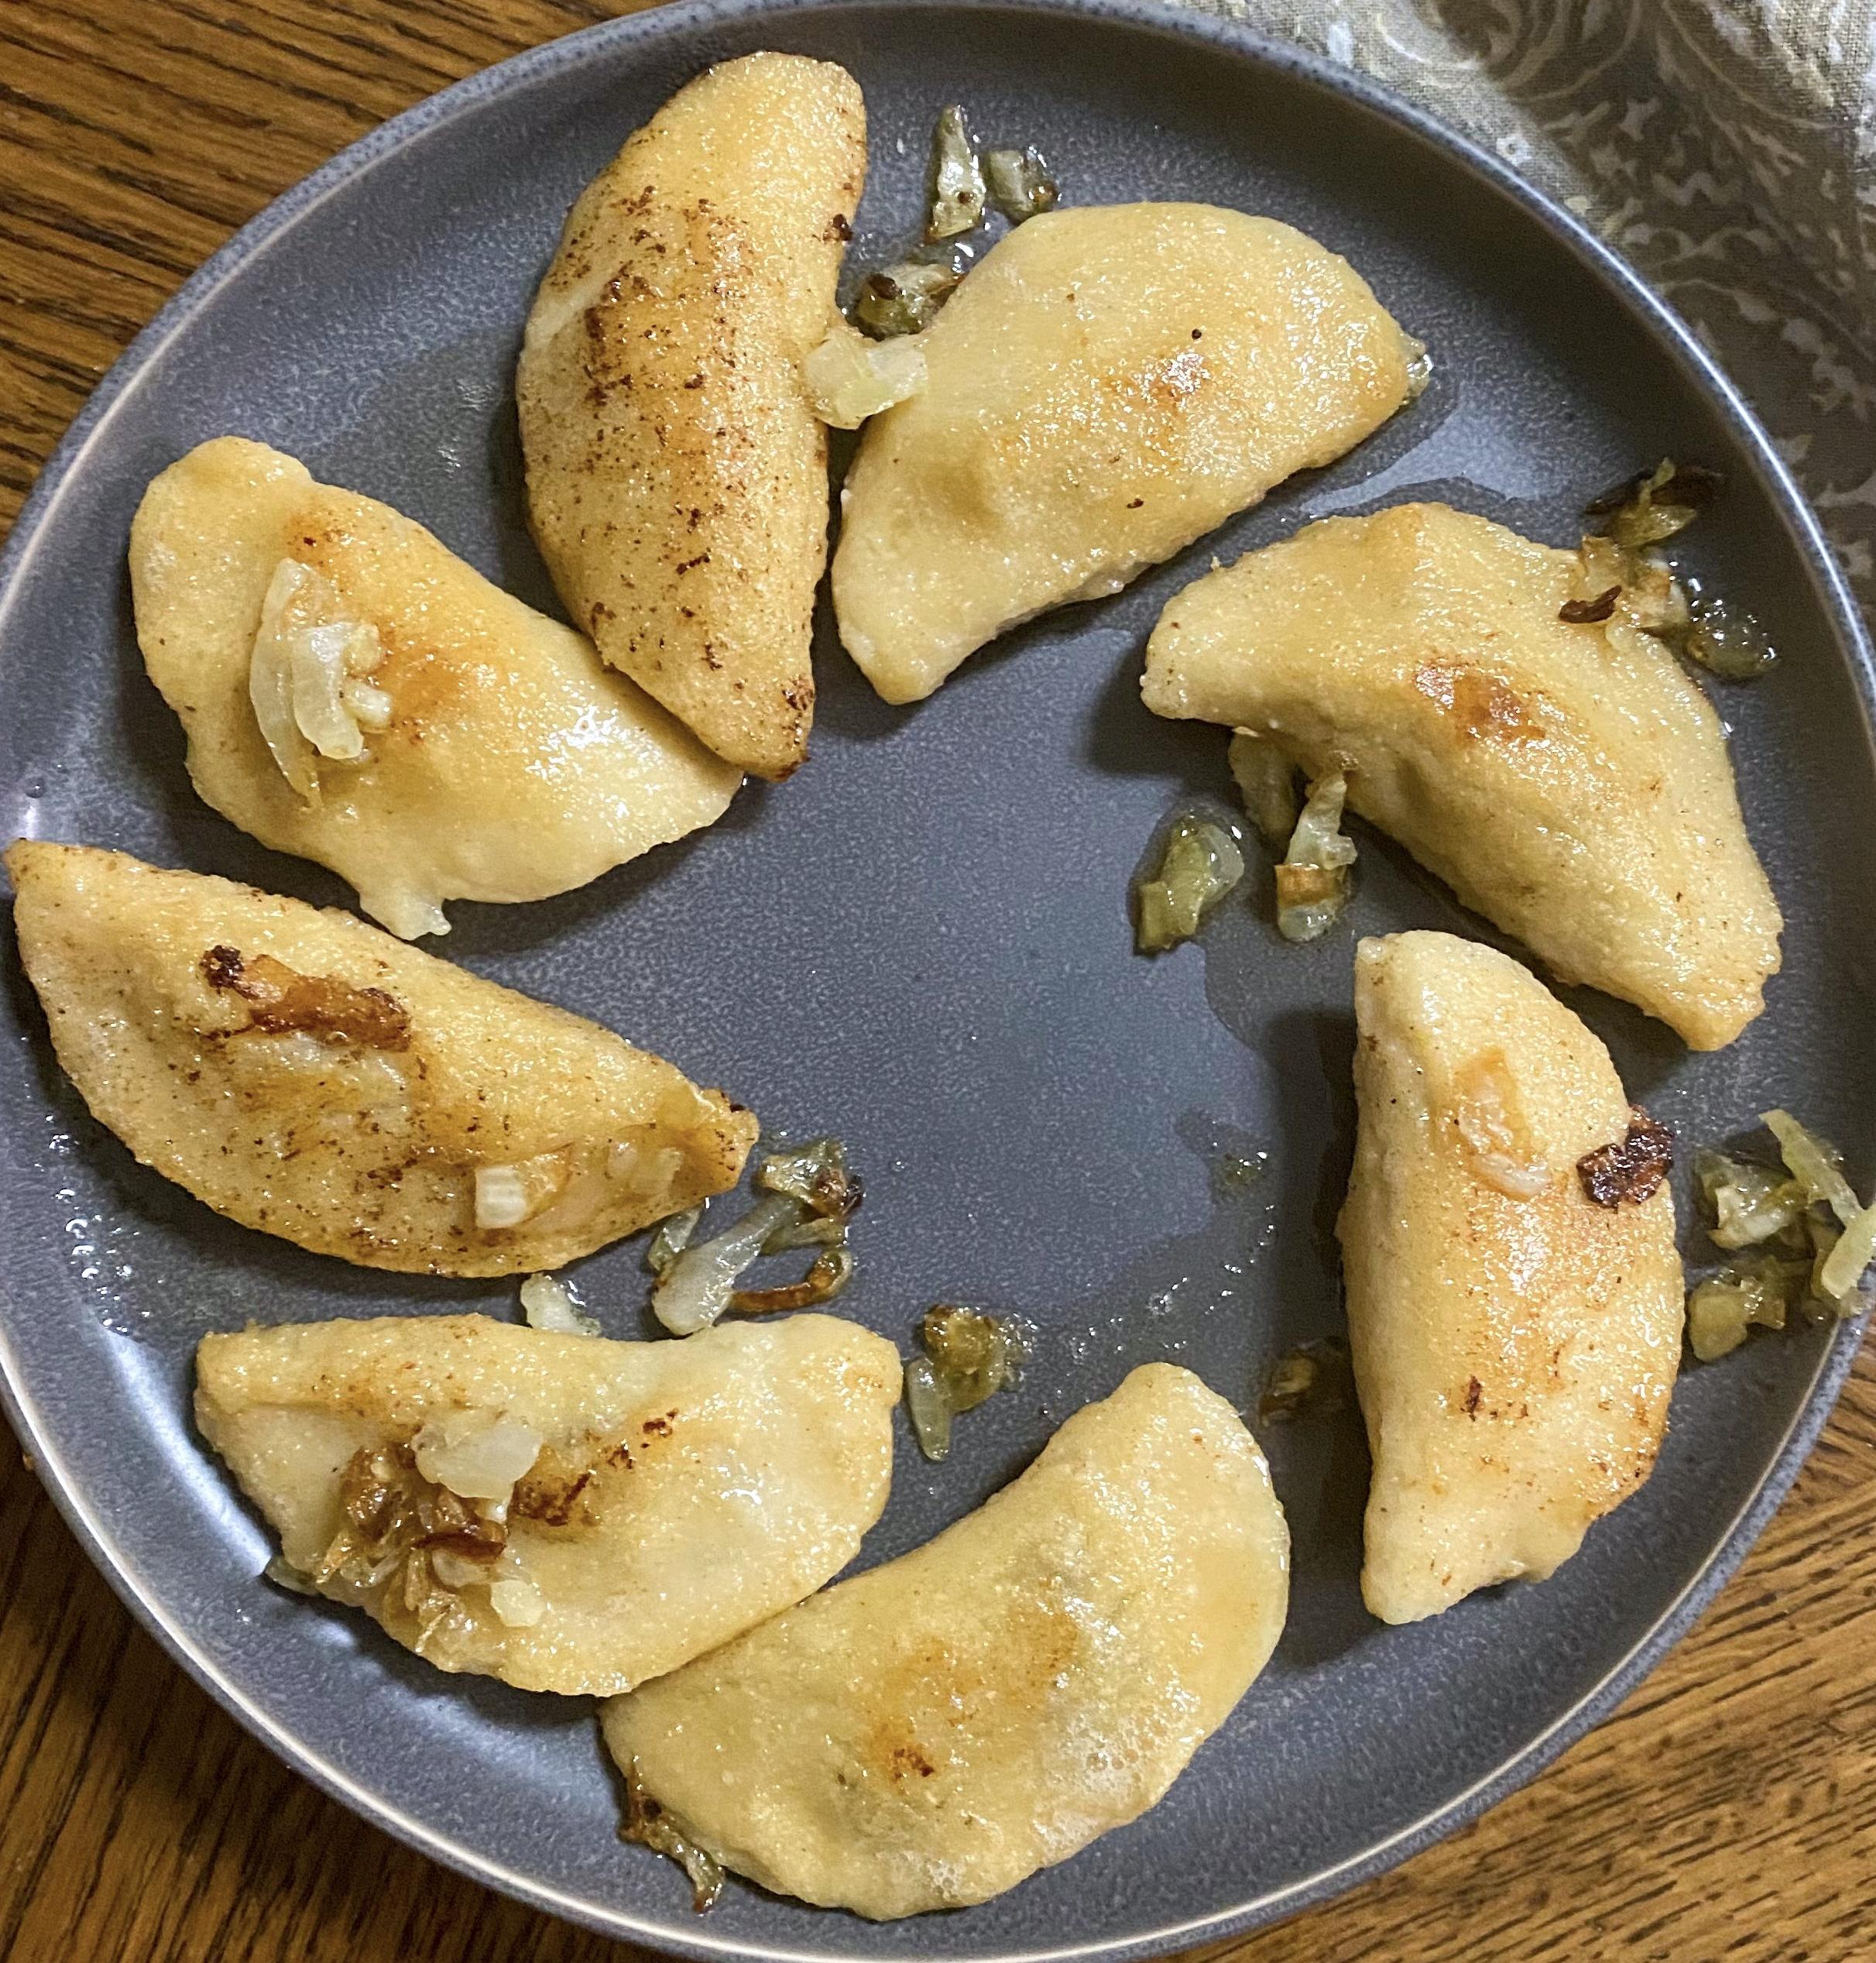  Who says gluten-free pasta can't be delicious? These perogies are proof that gluten-free can still be tasty.